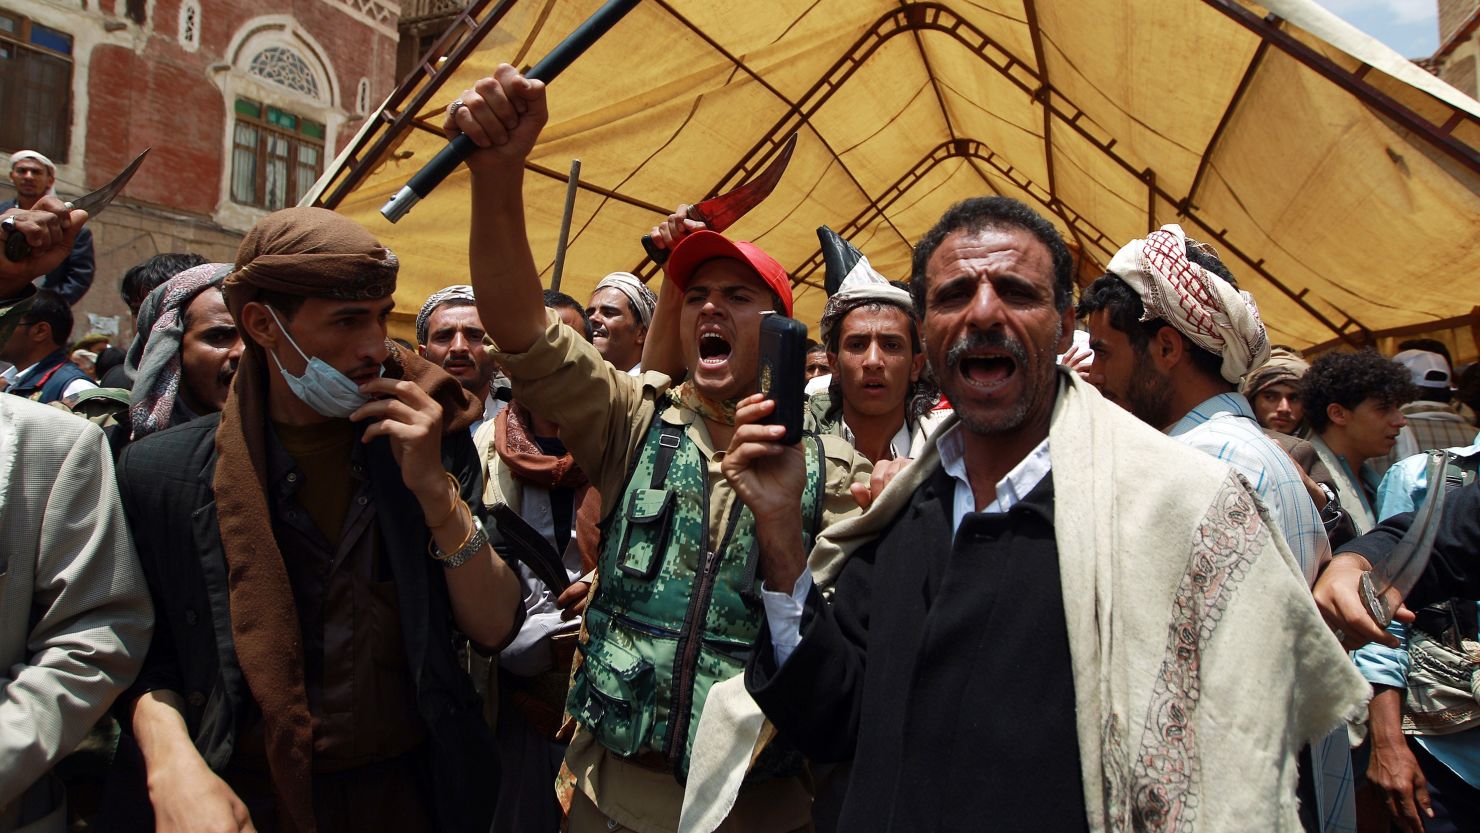 Yemeni Shiite Houthi anti-government protesters near the government headquarters in Sanaa on September 9, 2014.